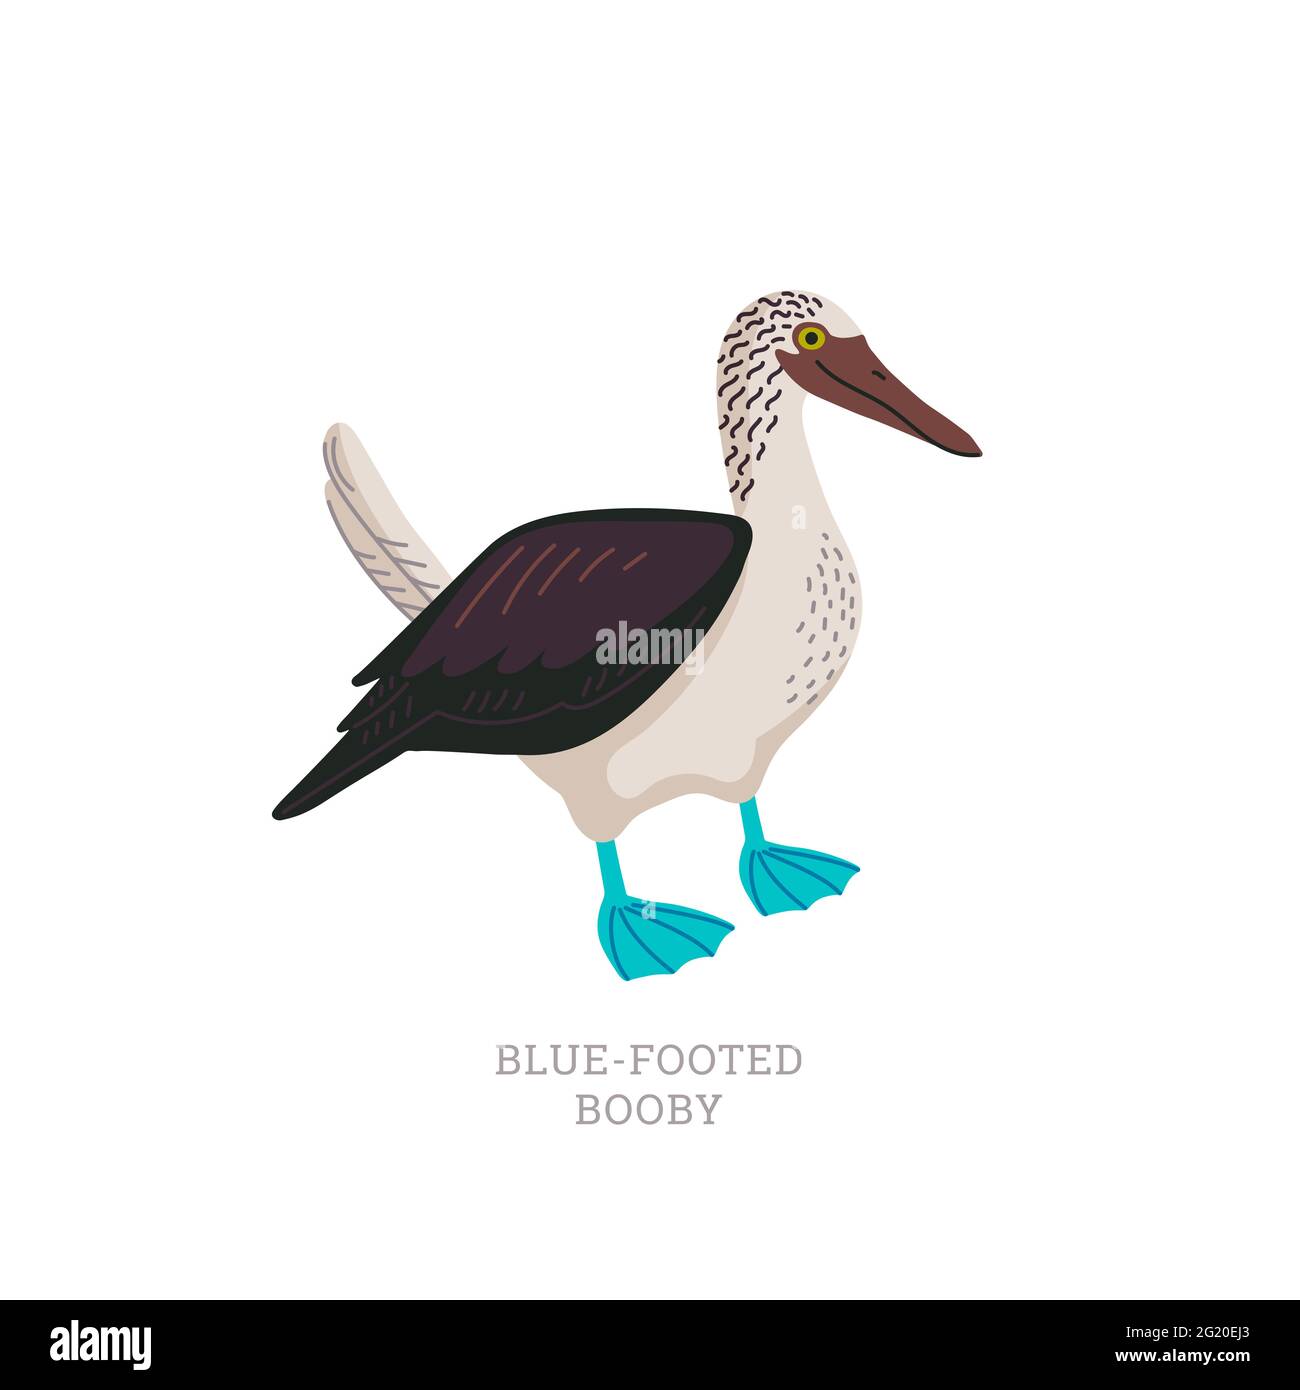 Rare animal collection. Blue-footed booby. Tropical marine bird with bright blue feet. Flat style vector illustration isolated on white background Stock Vector